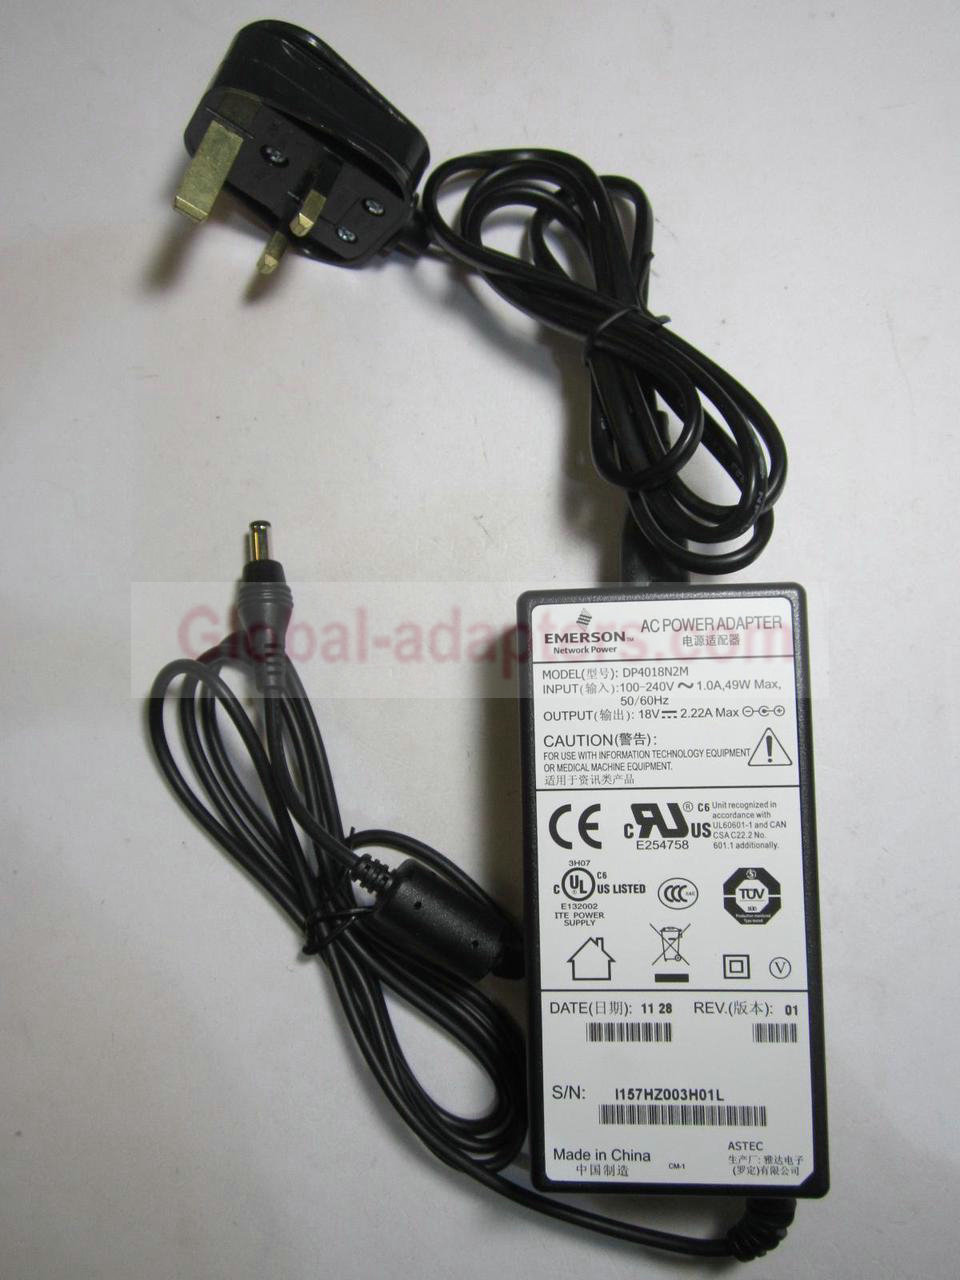 New 18V 2.22A EMERSON DP4018N2M Network Power Supply Ac Adapter